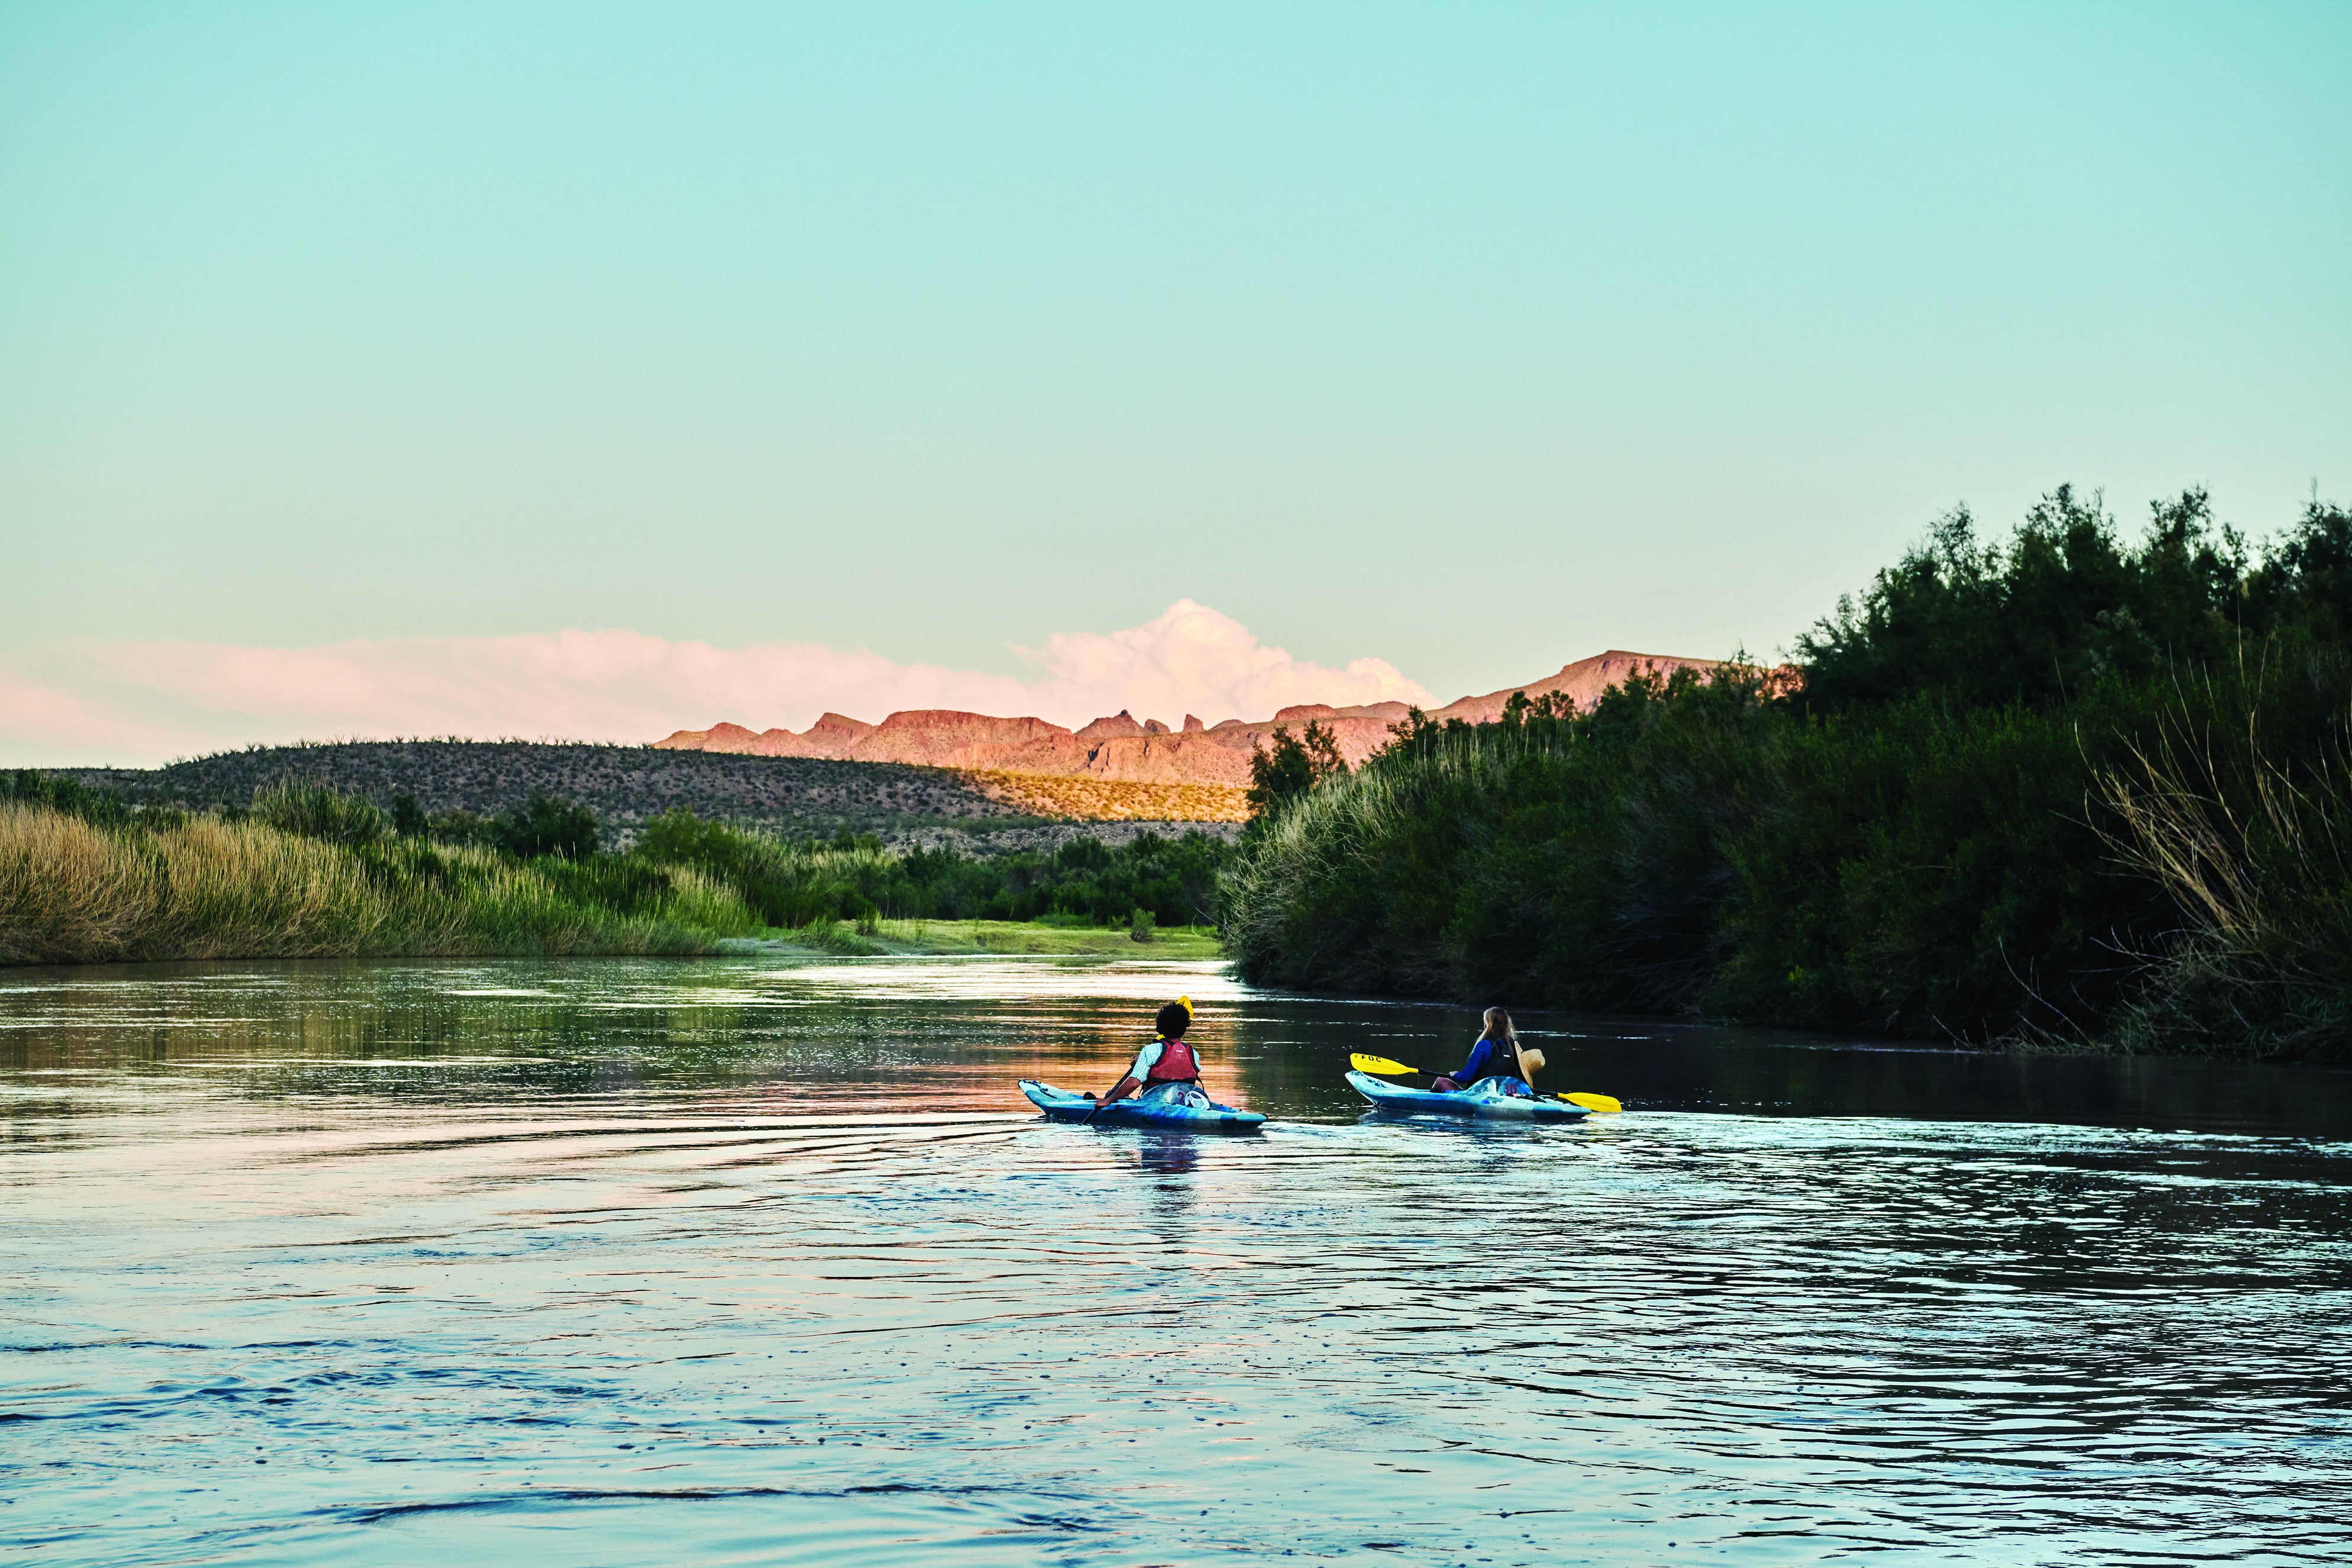 Immerse yourself in nature with a trip to Big Bend national park where you can kayak, hike and bike